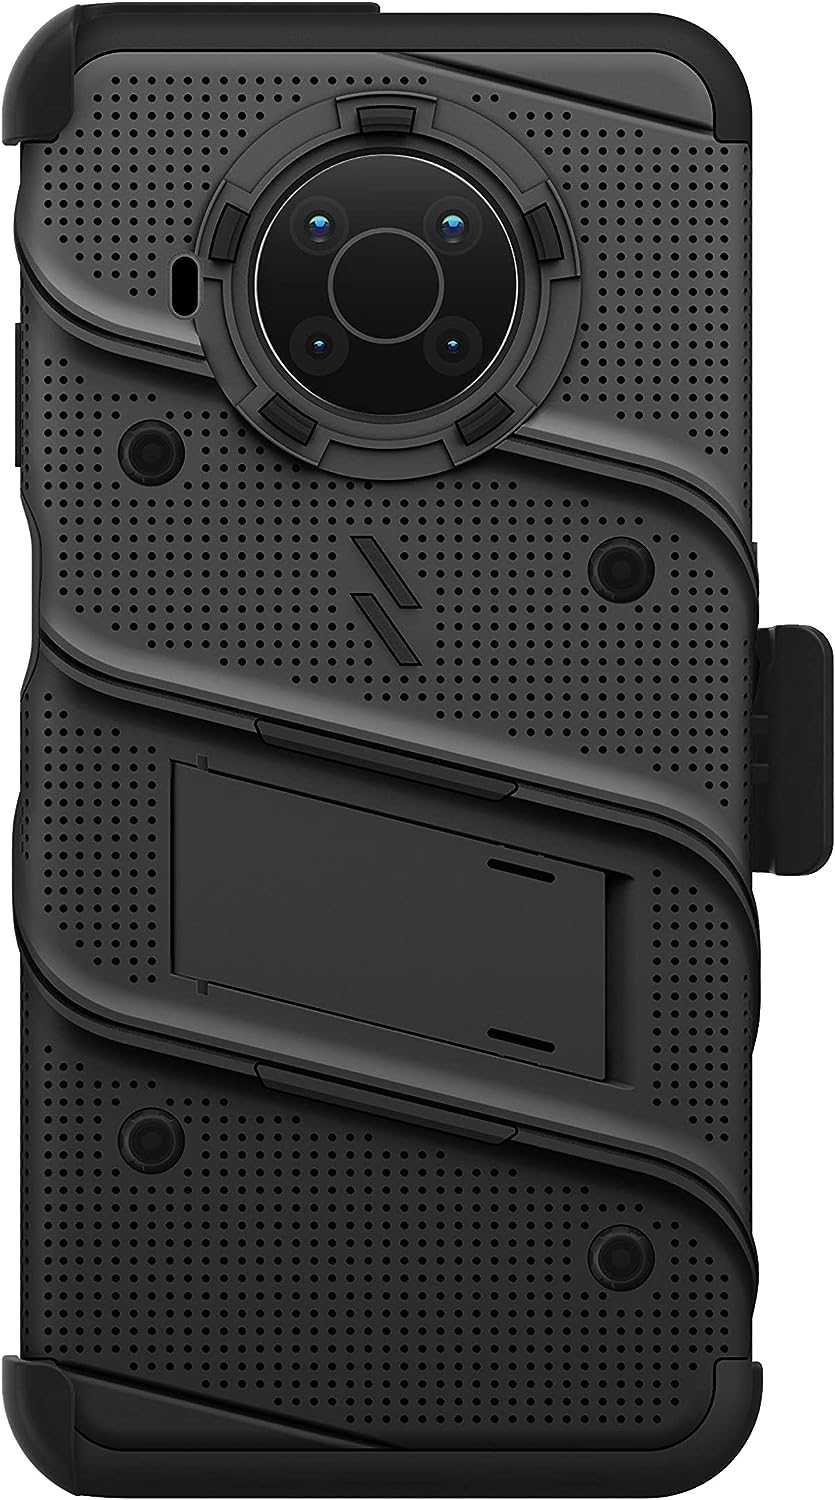 ZIZO Bolt Nokia X100 Holster Case with Screen Protector, Built-in Kickstand & Lanyard - Black